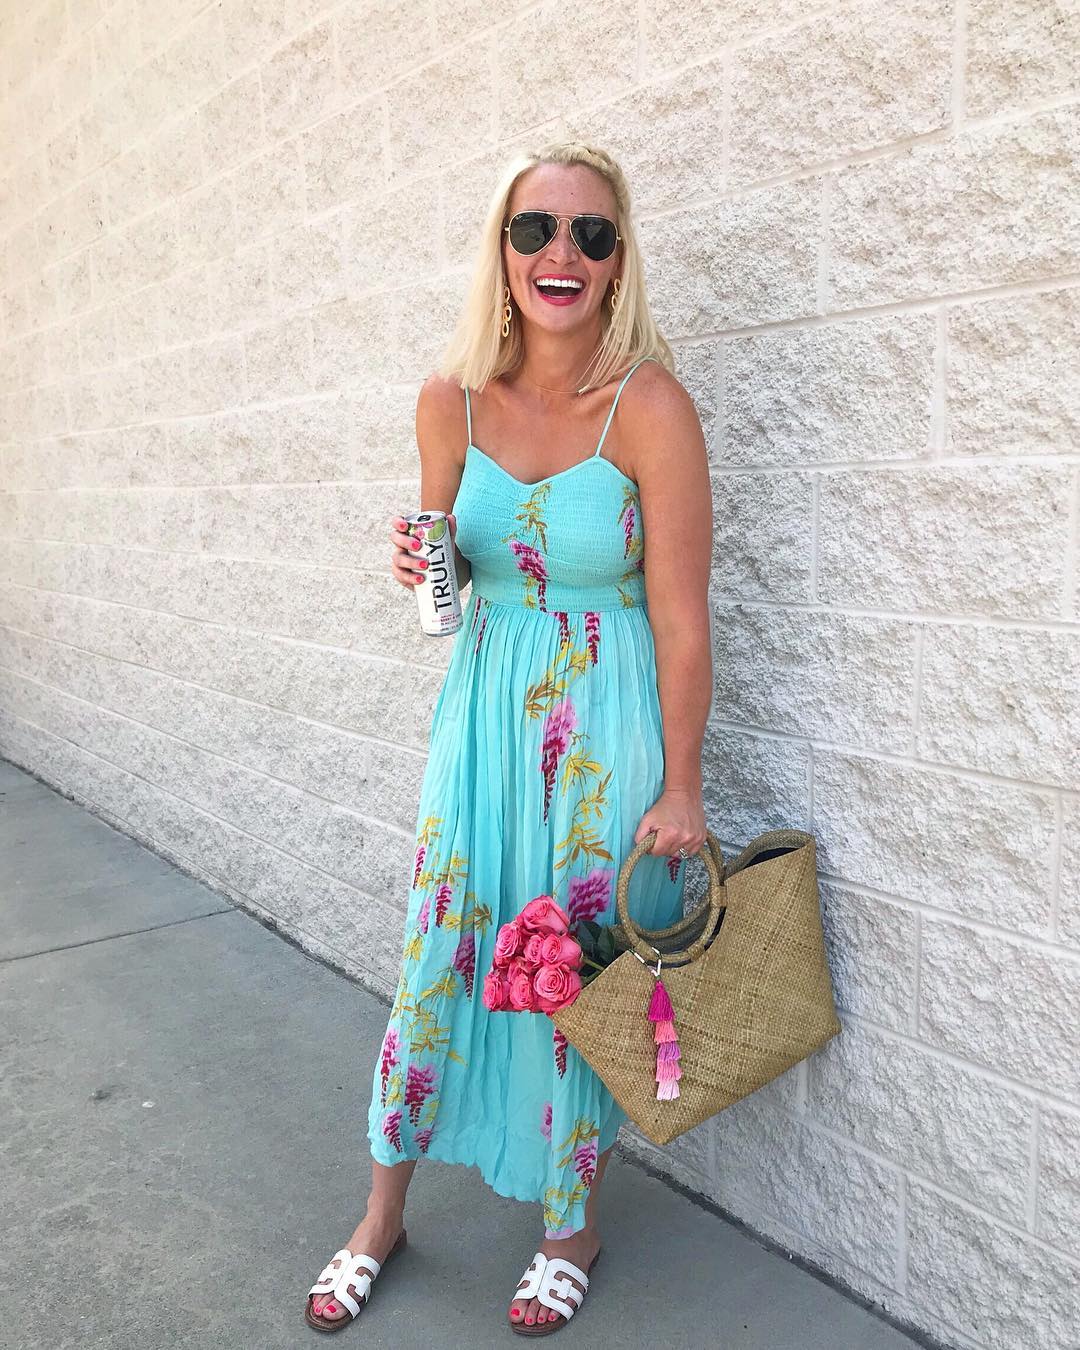 35 Women Turquoise Dress Outfit Ideas - Womenstyle